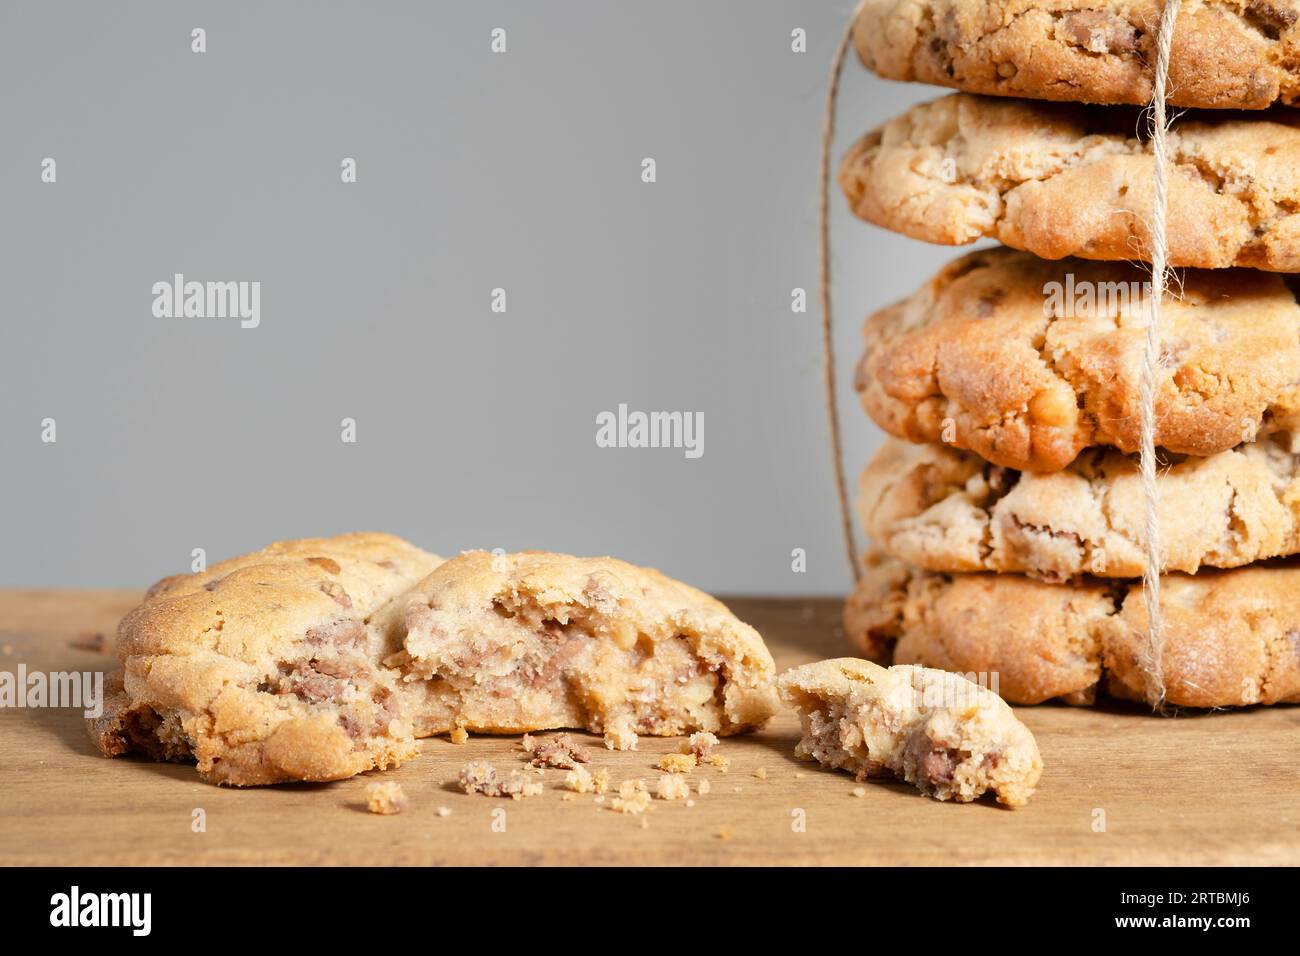 A batch of homemade New York style Chocolate Chip Cookies. They're large cookies with a  crisp outer crust and soft centre. the cookies are stacked Stock Photo